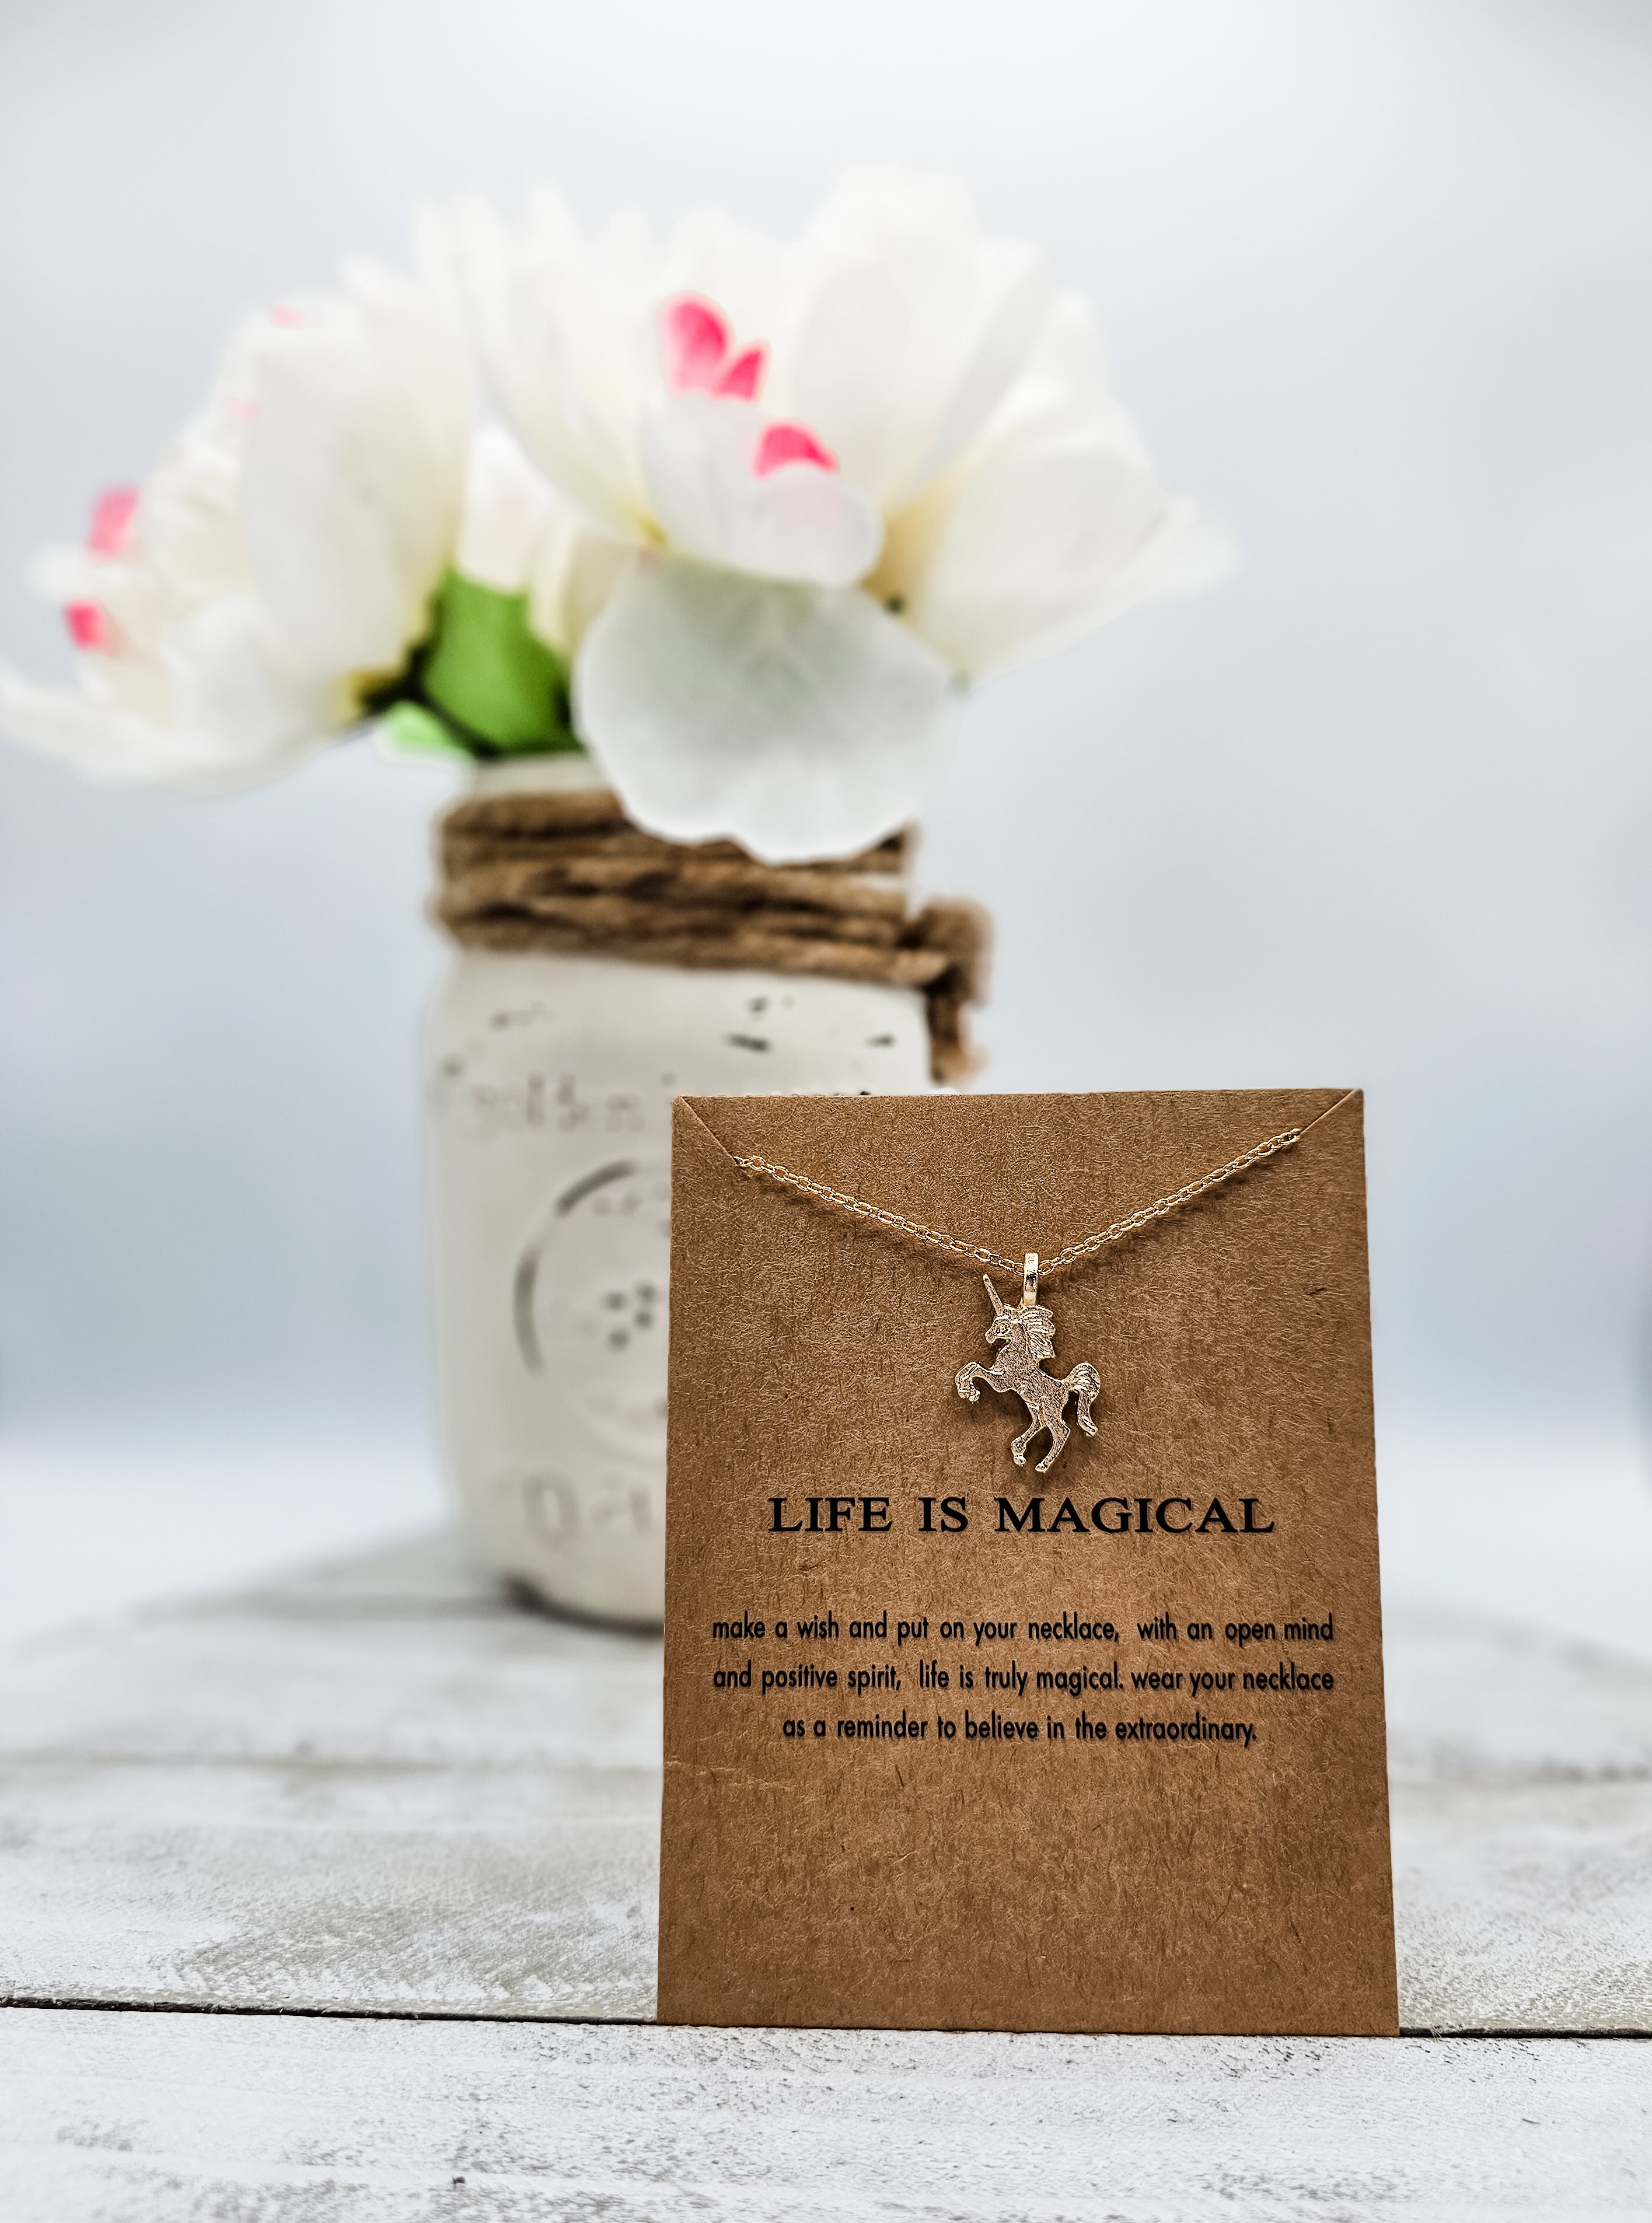 Life is Magical - Inspirational and Meaningful Pendant Necklace